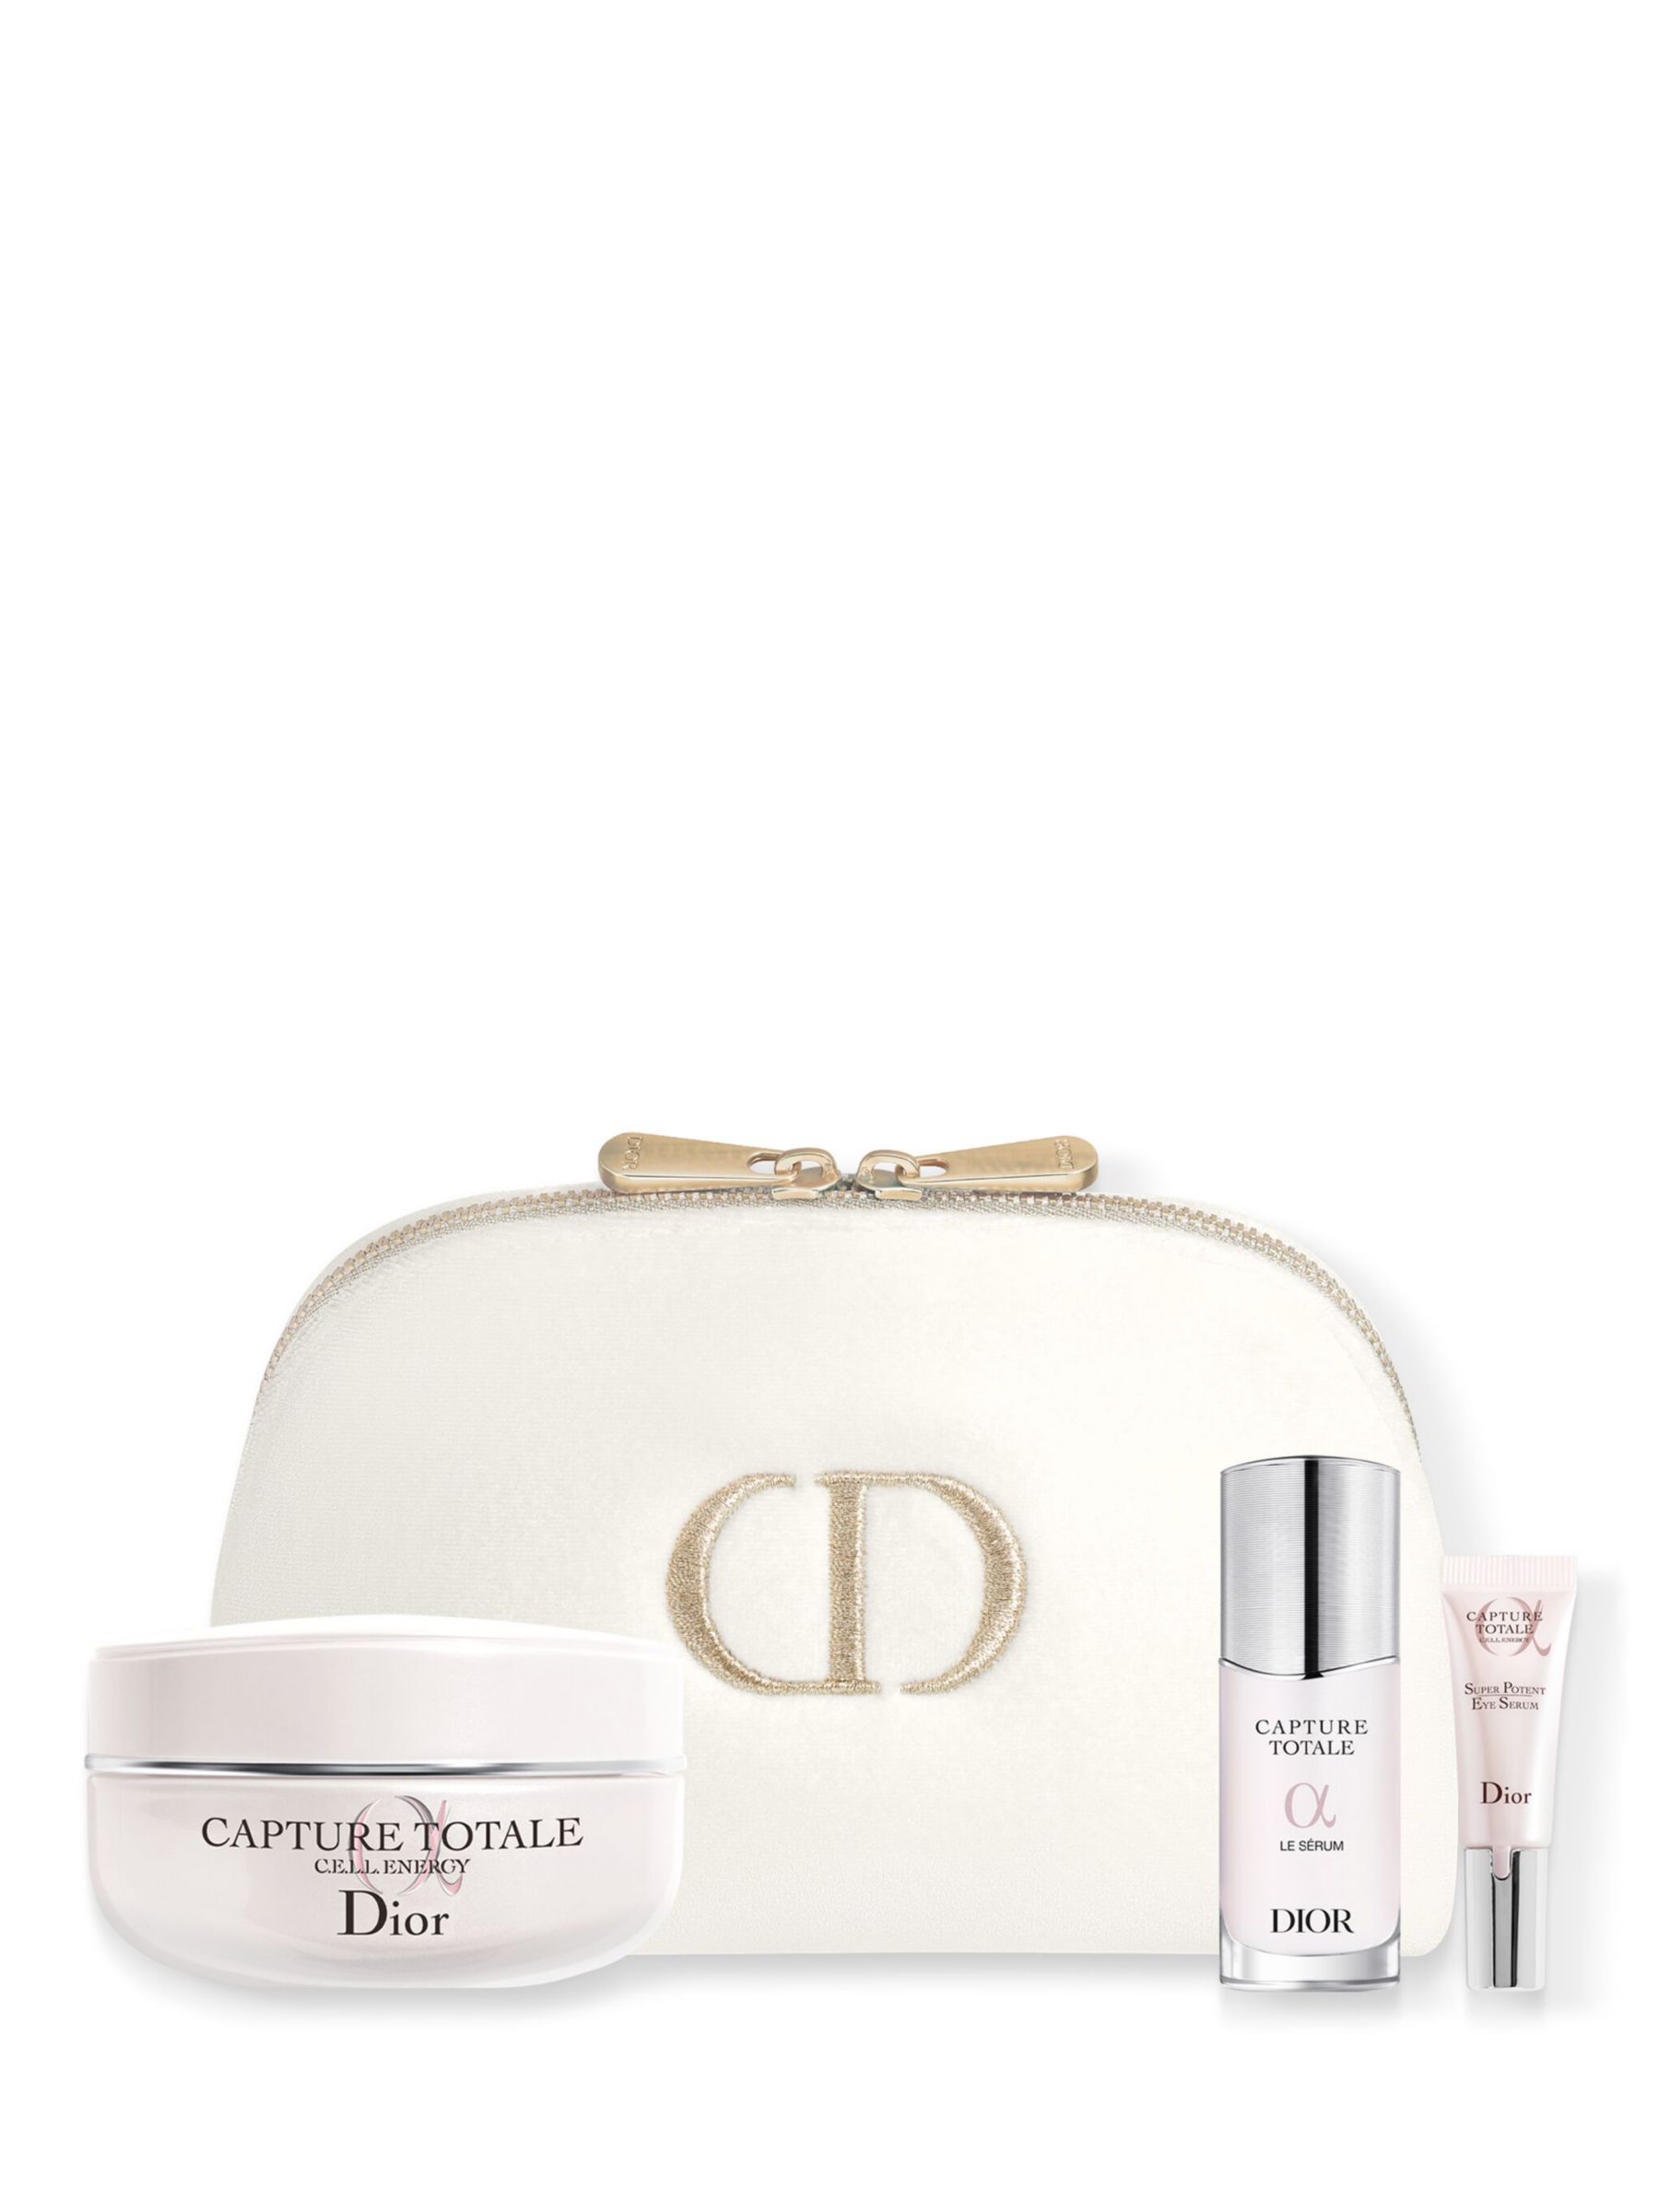 DIOR Capture Totale Anti-Ageing Skincare Gift Set